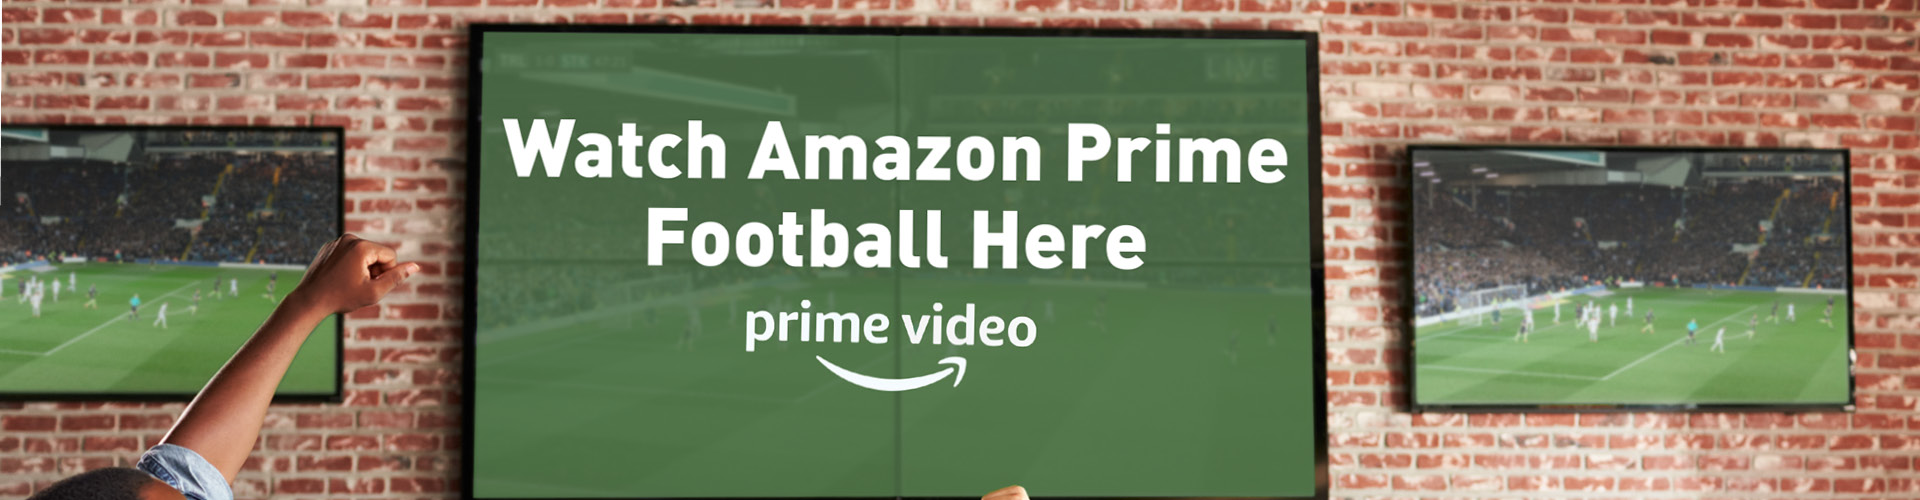 Watch Amazon Prime football at The Griffin in Swansea